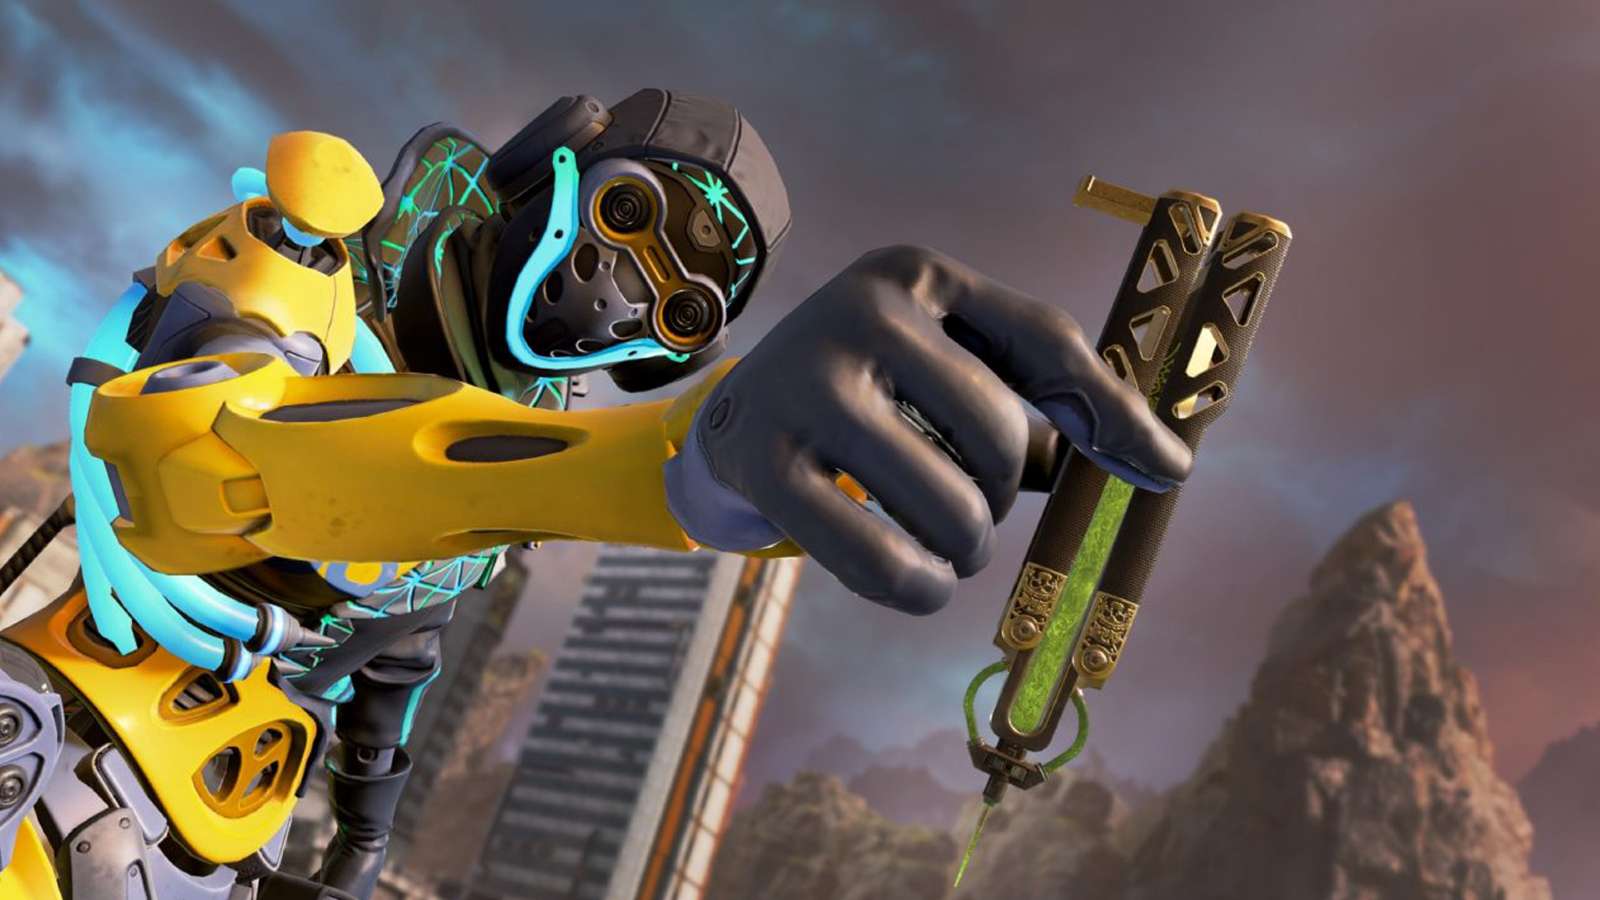 Octane flexing on the other Apex Legends with is cool heirloom.